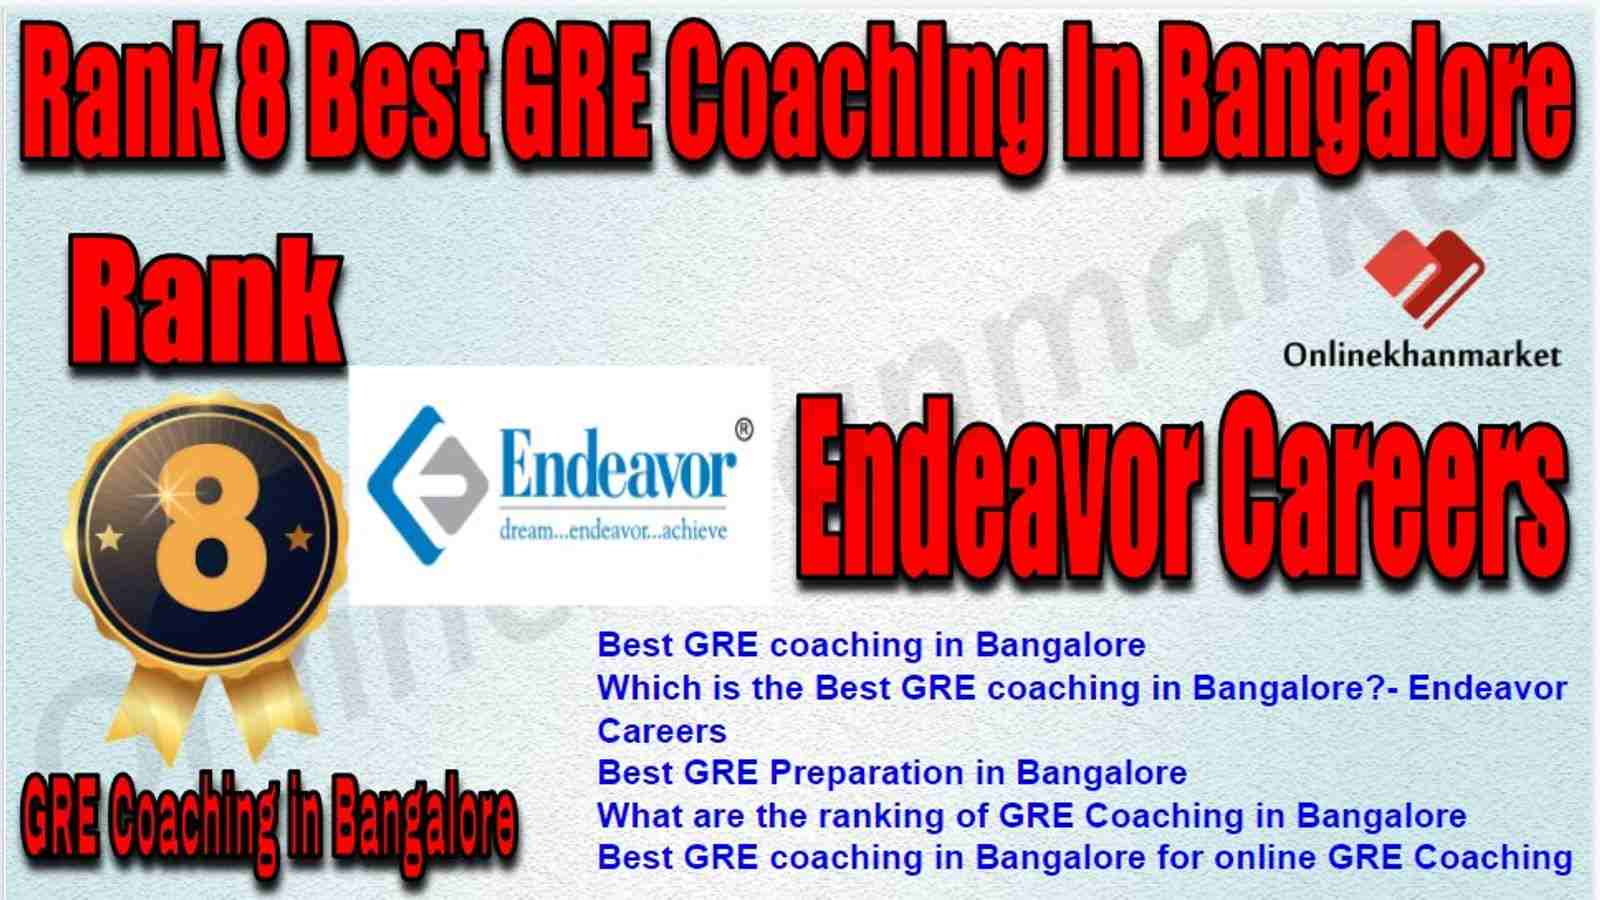 Rank 8 Best GRE Coaching in Bangalore